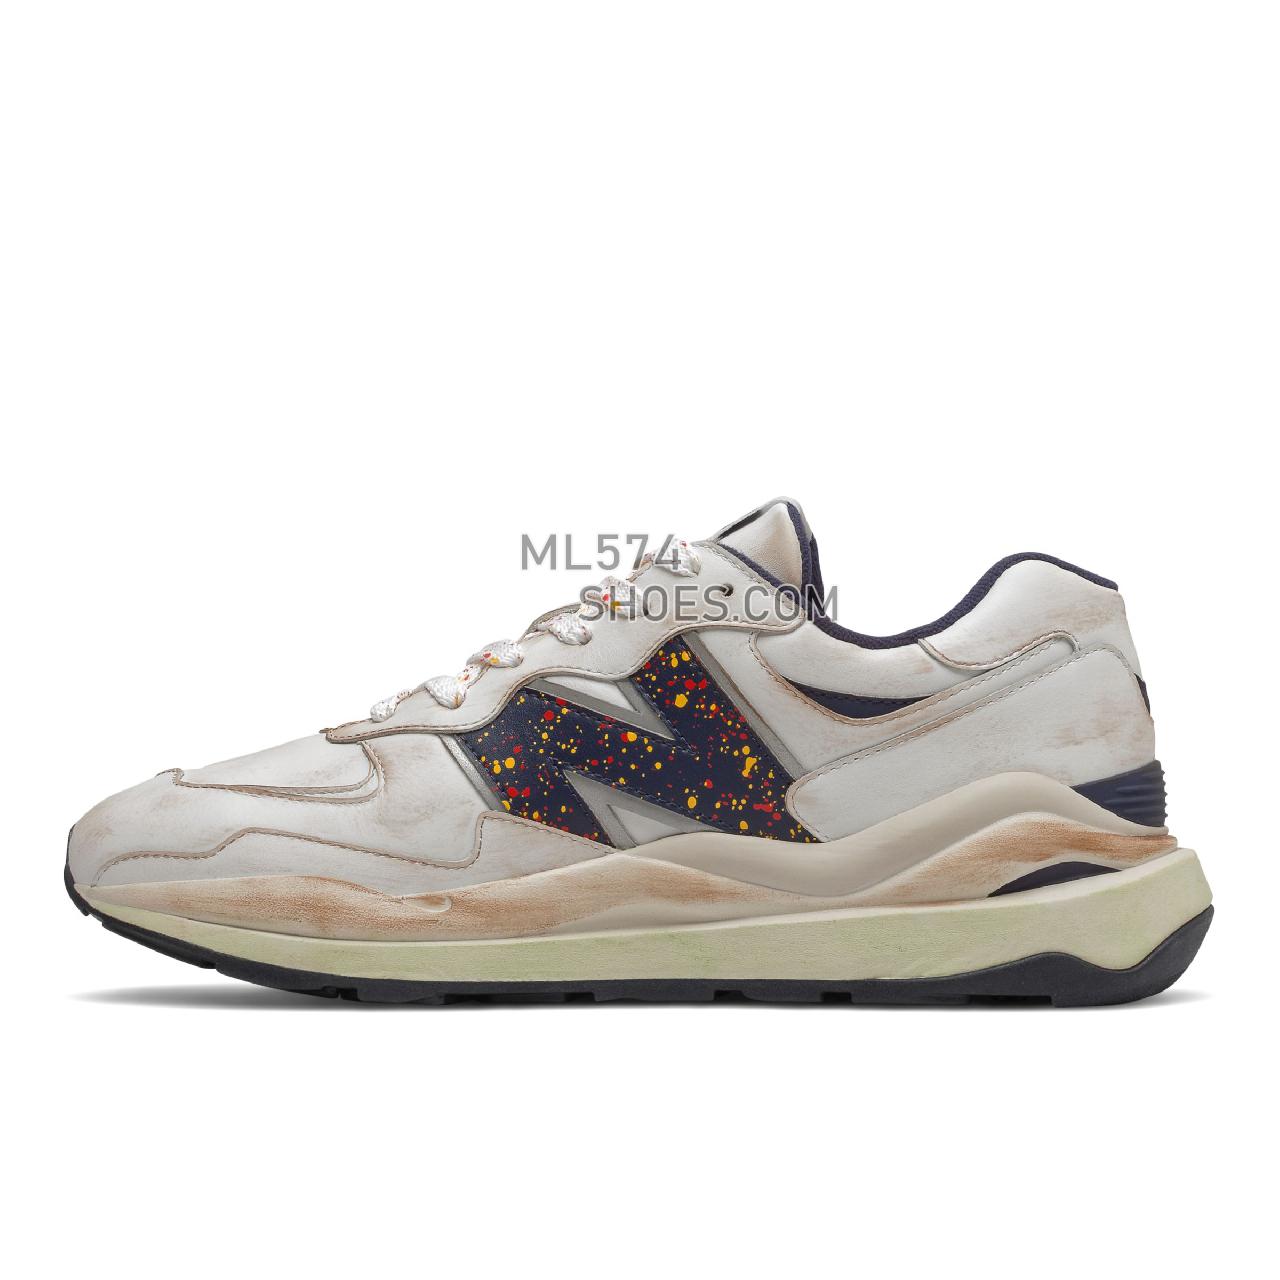 New Balance 57/40 - Men's Sport Style Sneakers - White with Natural Indigo - M5740FD1